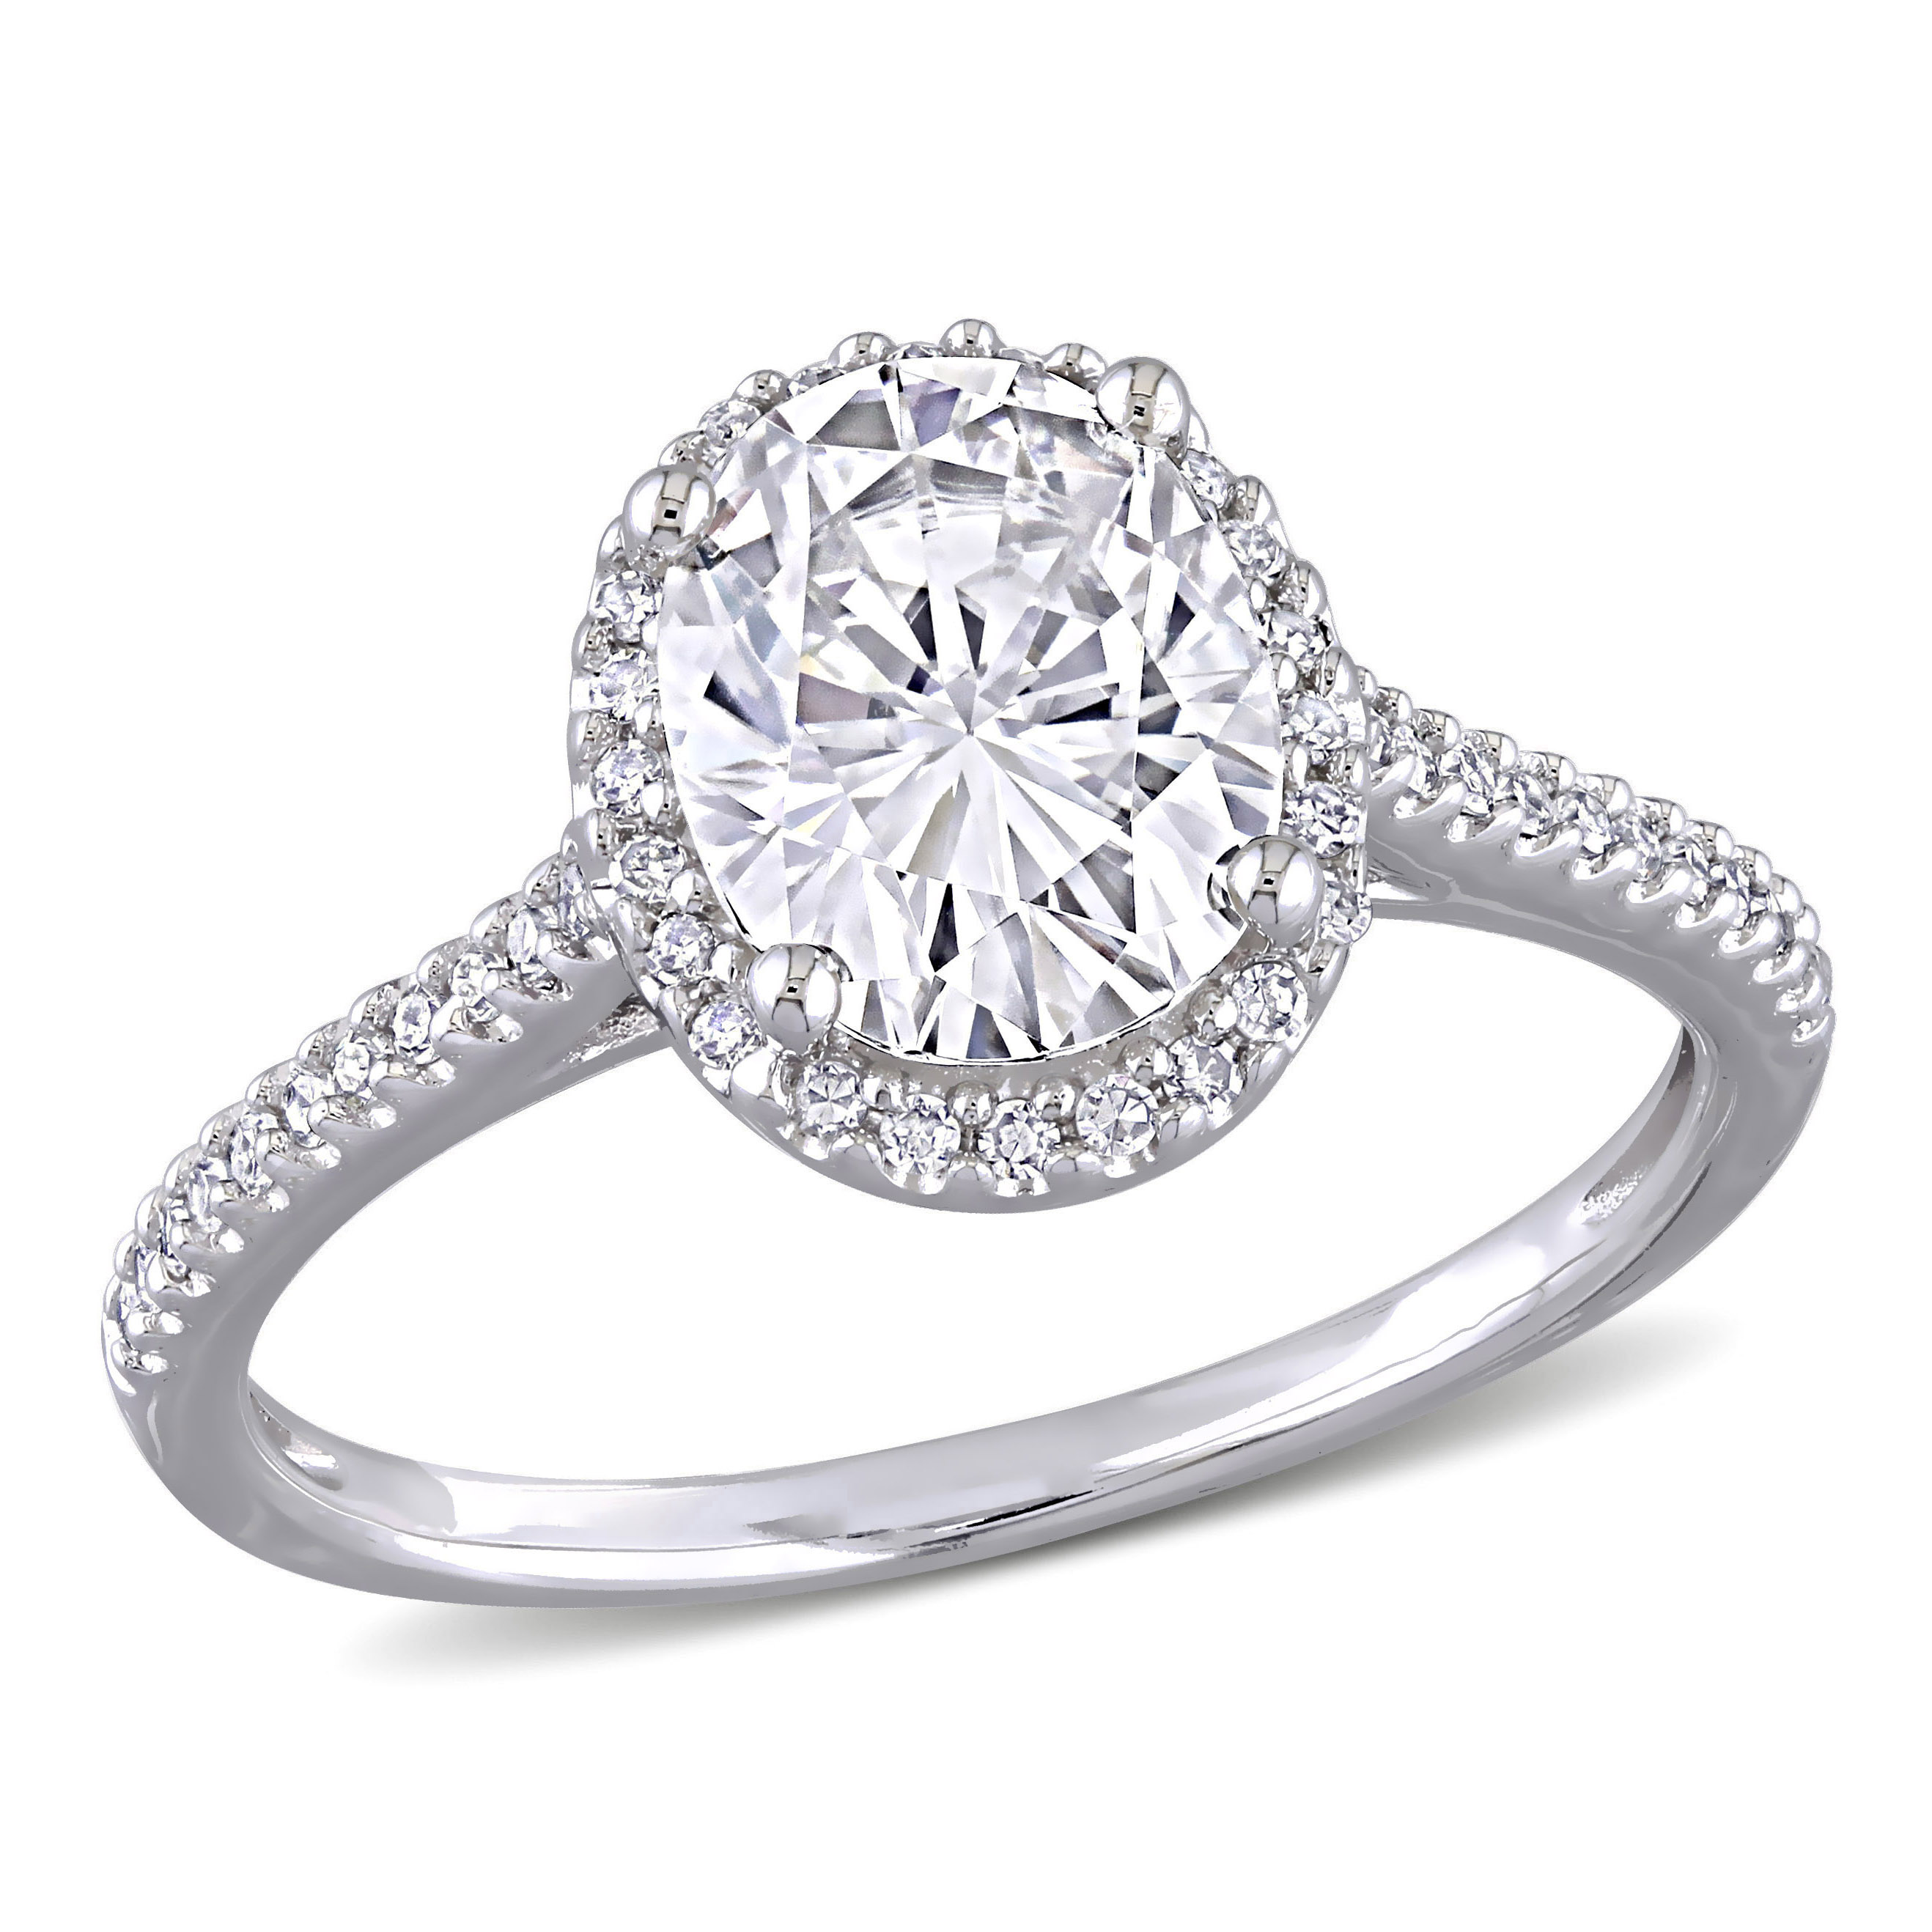 2 CT DEW Oval Created Moissanite and 1/4 CT TW Diamond Double Halo Engagement Ring in 14k White Gold